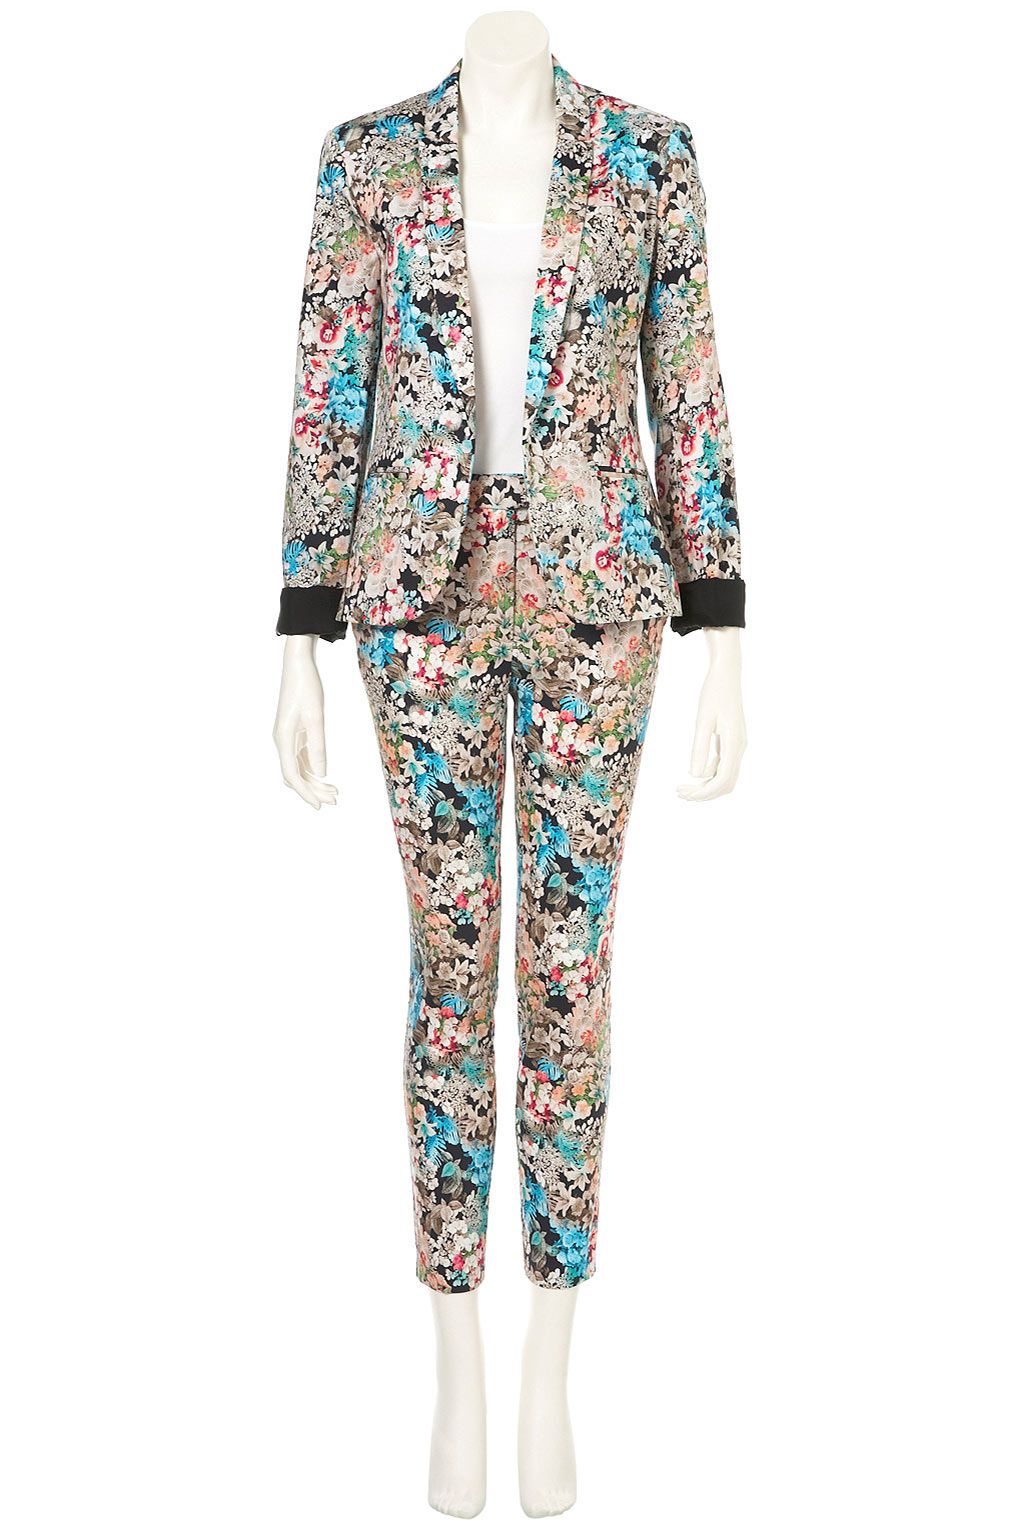 Artigli Malta  This exclusive floral trouser suit by LARIGA designer brand  is giving us all the festive feels   Get it at 20 OFF  Visit  us in store at